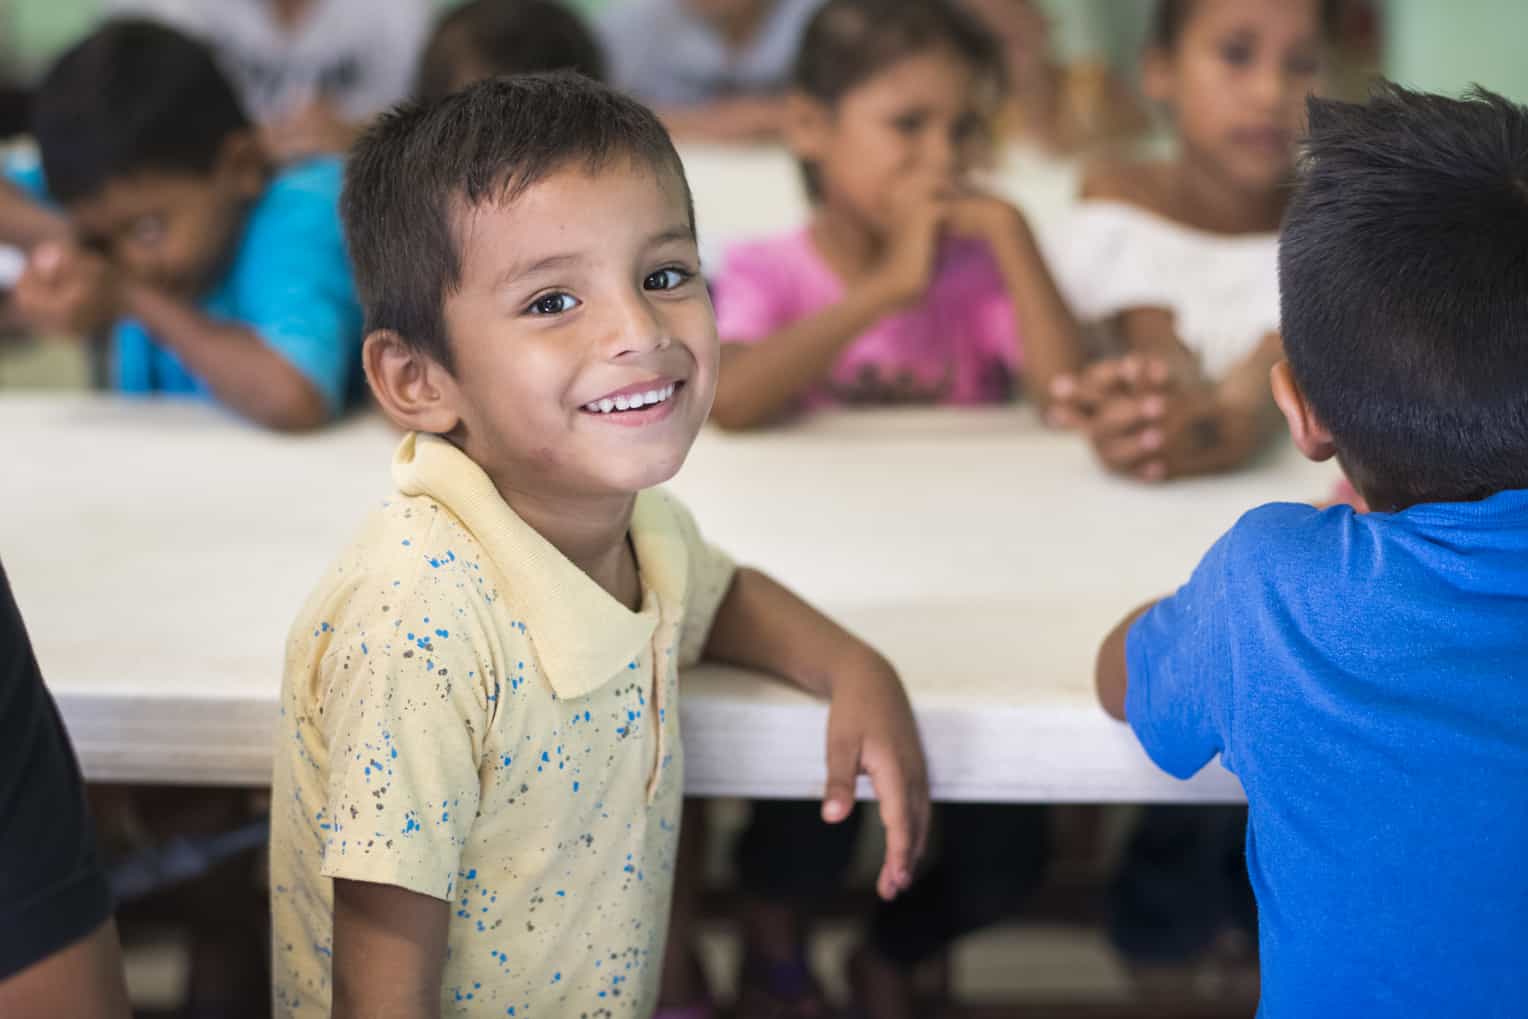 Children who come to the feeding centers for breakfast also hear God’s Word. Please pray for these children as they grow in their relationship with God.